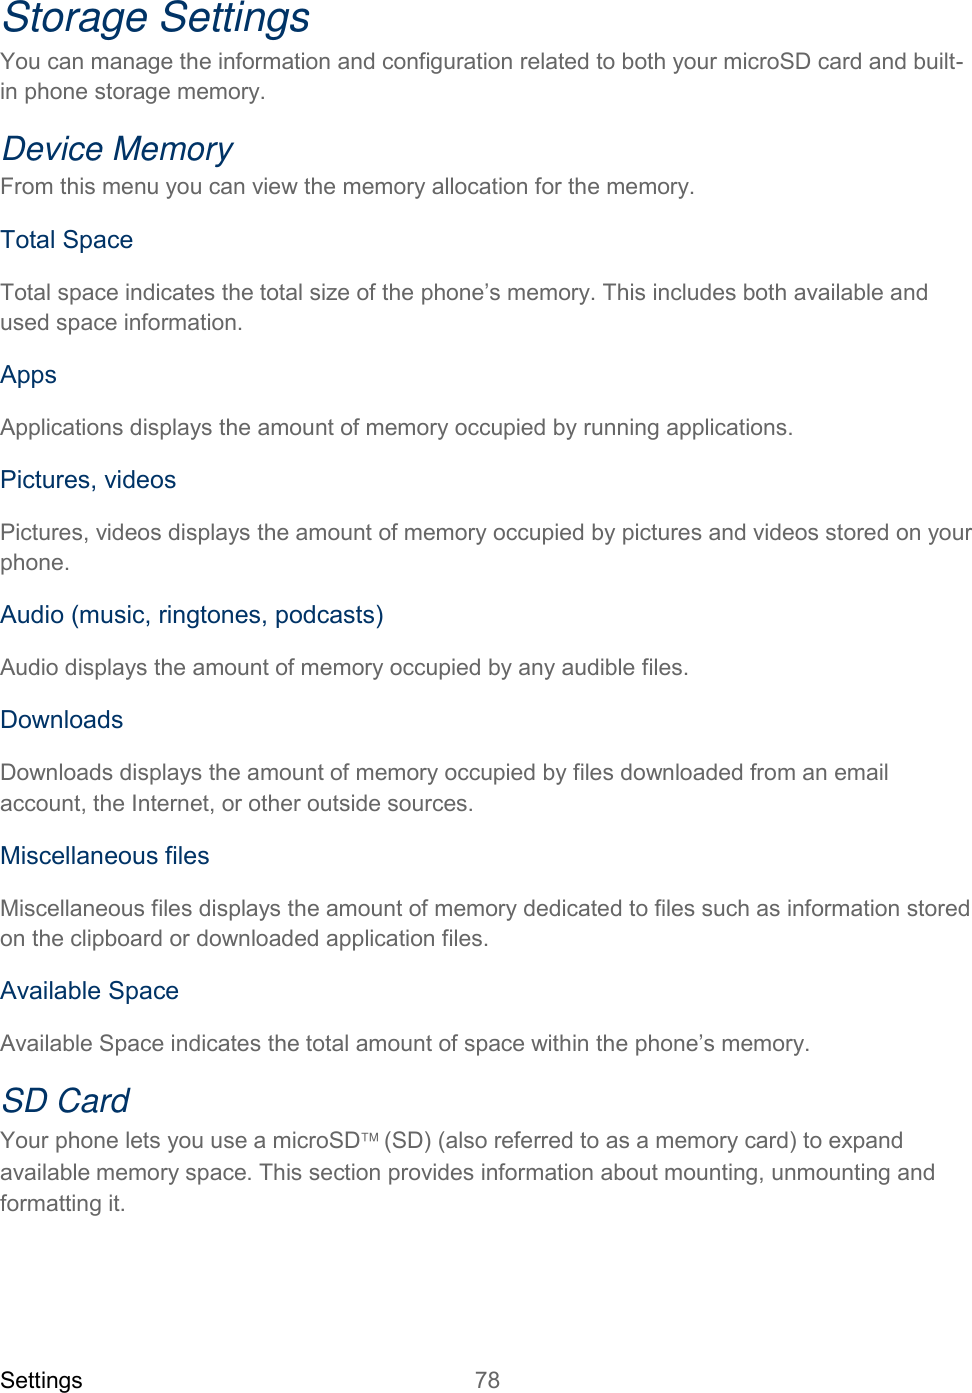 Settings 78   Storage Settings You can manage the information and configuration related to both your microSD card and built-in phone storage memory. Device Memory From this menu you can view the memory allocation for the memory.  Total Space Total space indicates the total size of the phone’s memory. This includes both available and used space information. Apps Applications displays the amount of memory occupied by running applications. Pictures, videos Pictures, videos displays the amount of memory occupied by pictures and videos stored on your phone. Audio (music, ringtones, podcasts) Audio displays the amount of memory occupied by any audible files. Downloads Downloads displays the amount of memory occupied by files downloaded from an email account, the Internet, or other outside sources.  Miscellaneous files Miscellaneous files displays the amount of memory dedicated to files such as information stored on the clipboard or downloaded application files. Available Space Available Space indicates the total amount of space within the phone’s memory. SD Card  Your phone lets you use a microSD(SD) (also referred to as a memory card) to expand availablememory space. This section provides information about mounting, unmounting and formatting it. 